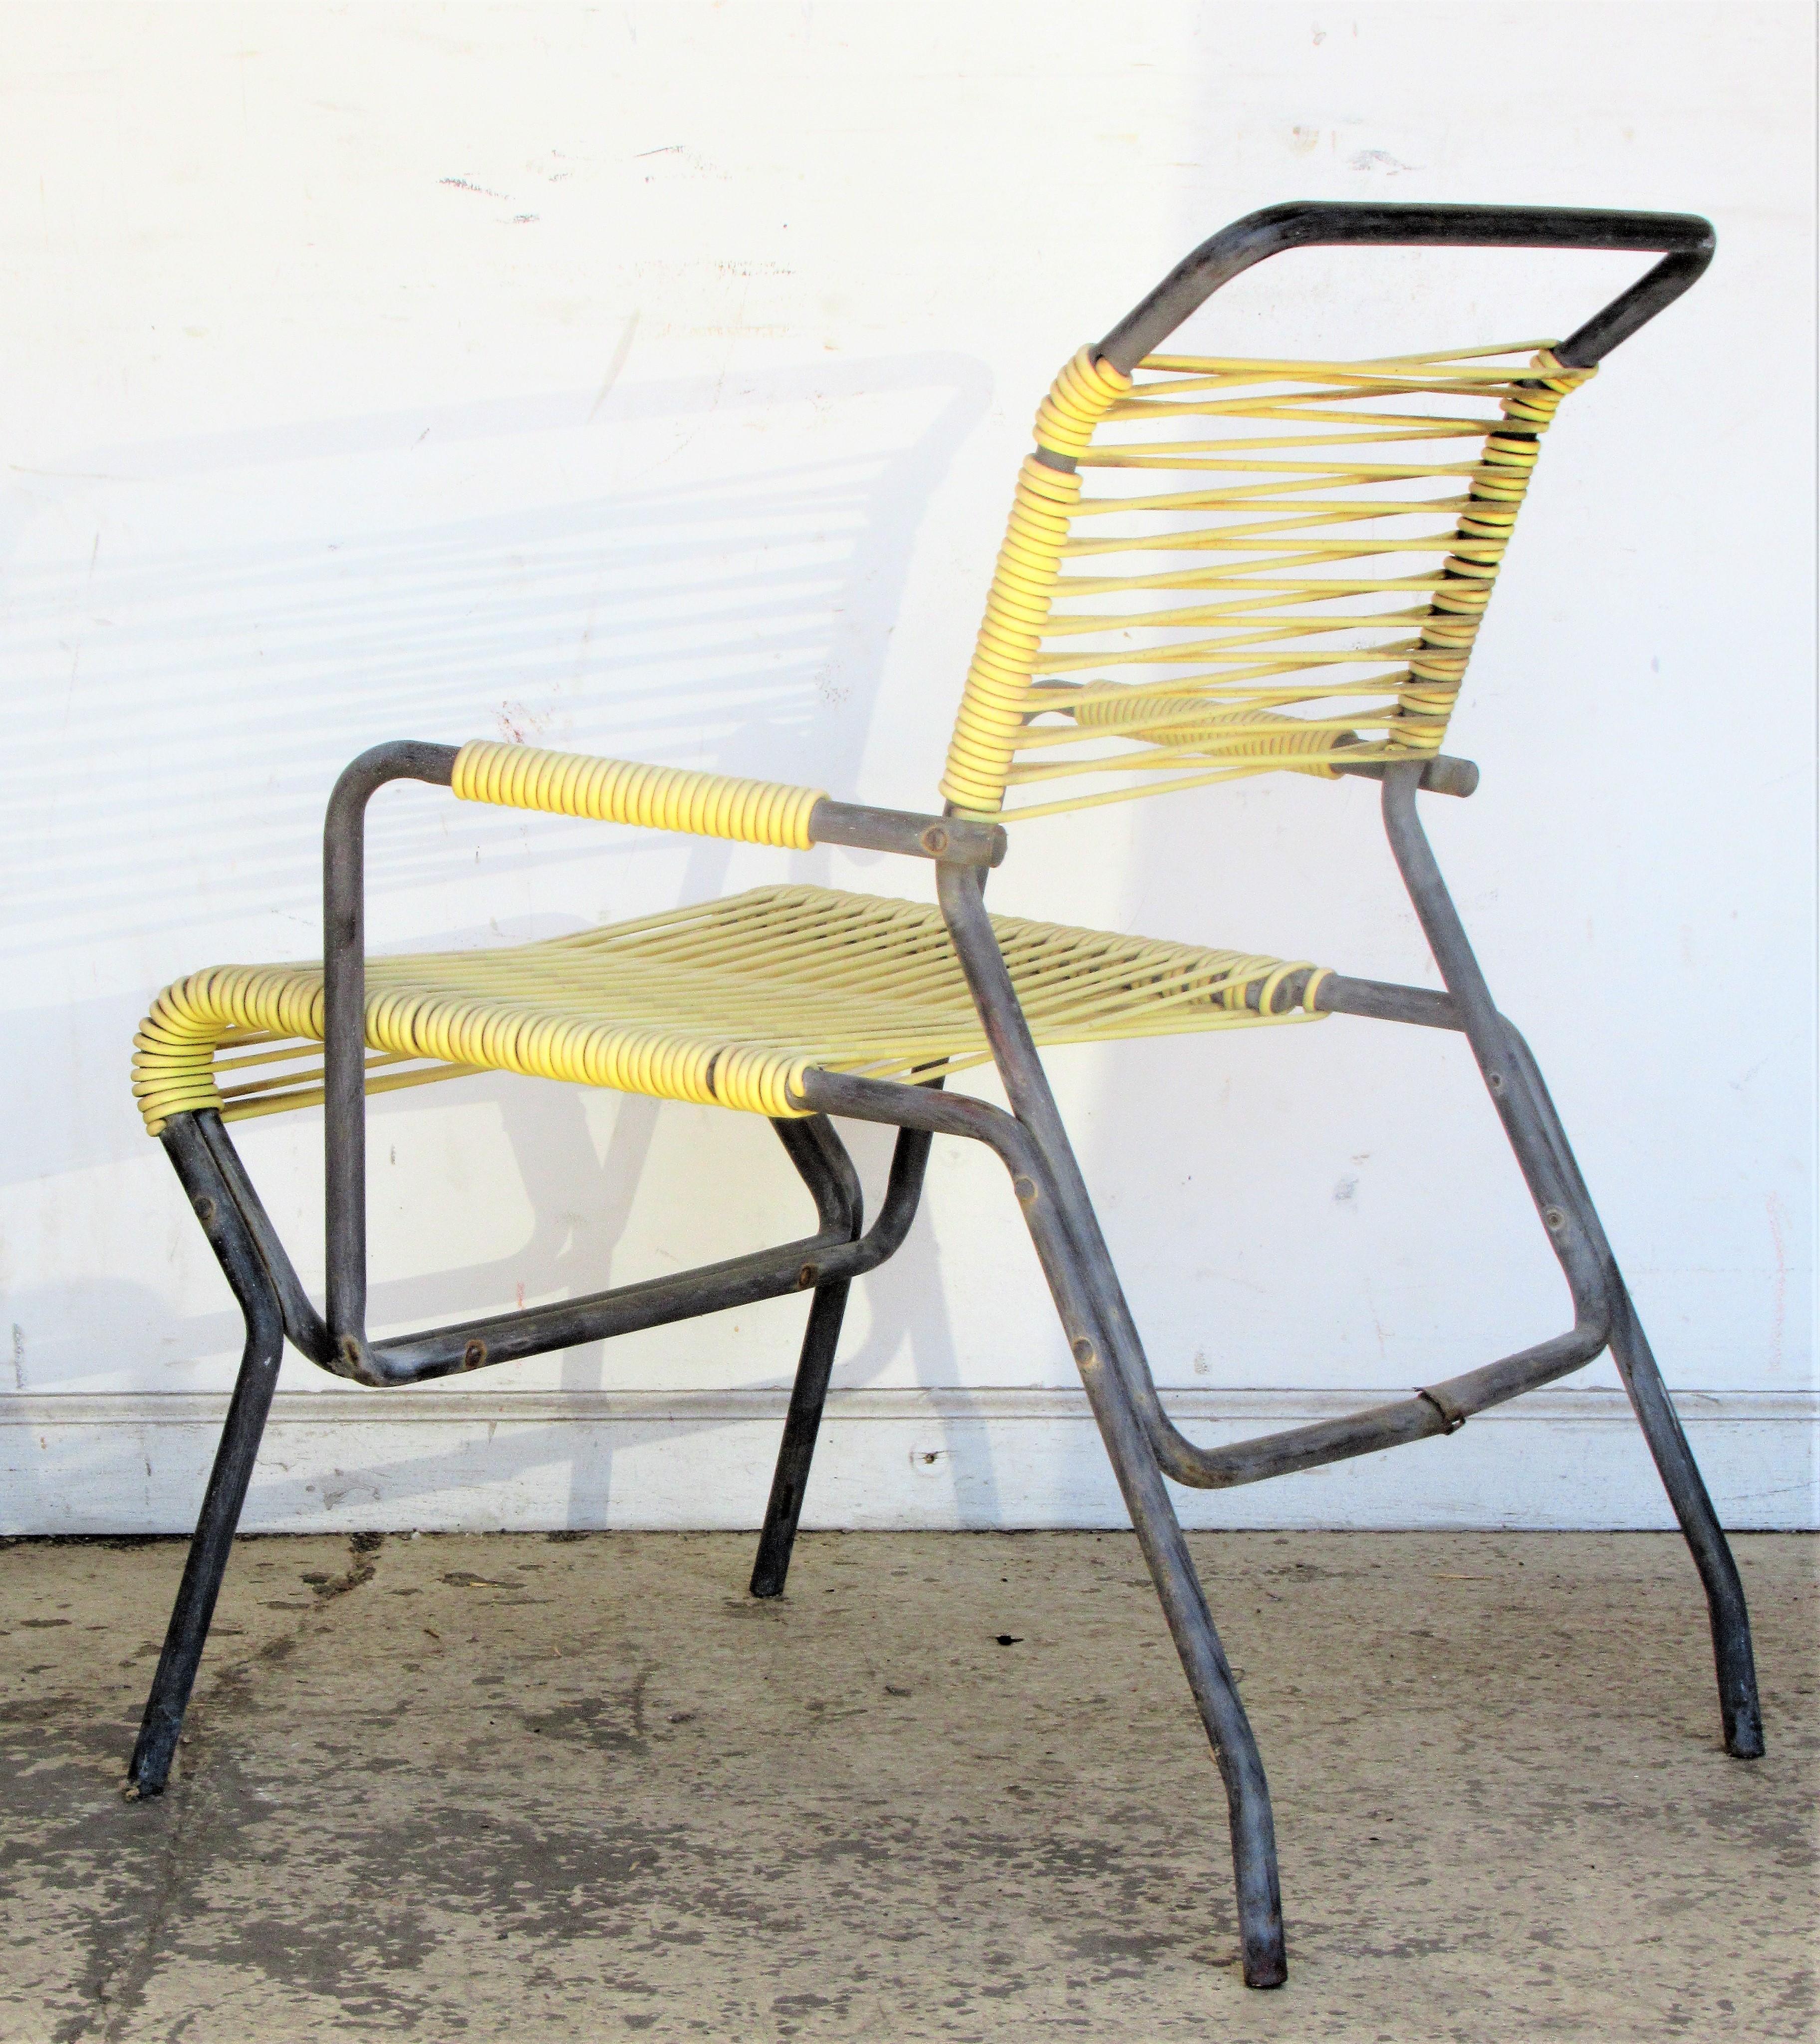 Mid-Century Modern  Iron Patio Chairs by Surf Line For Sale